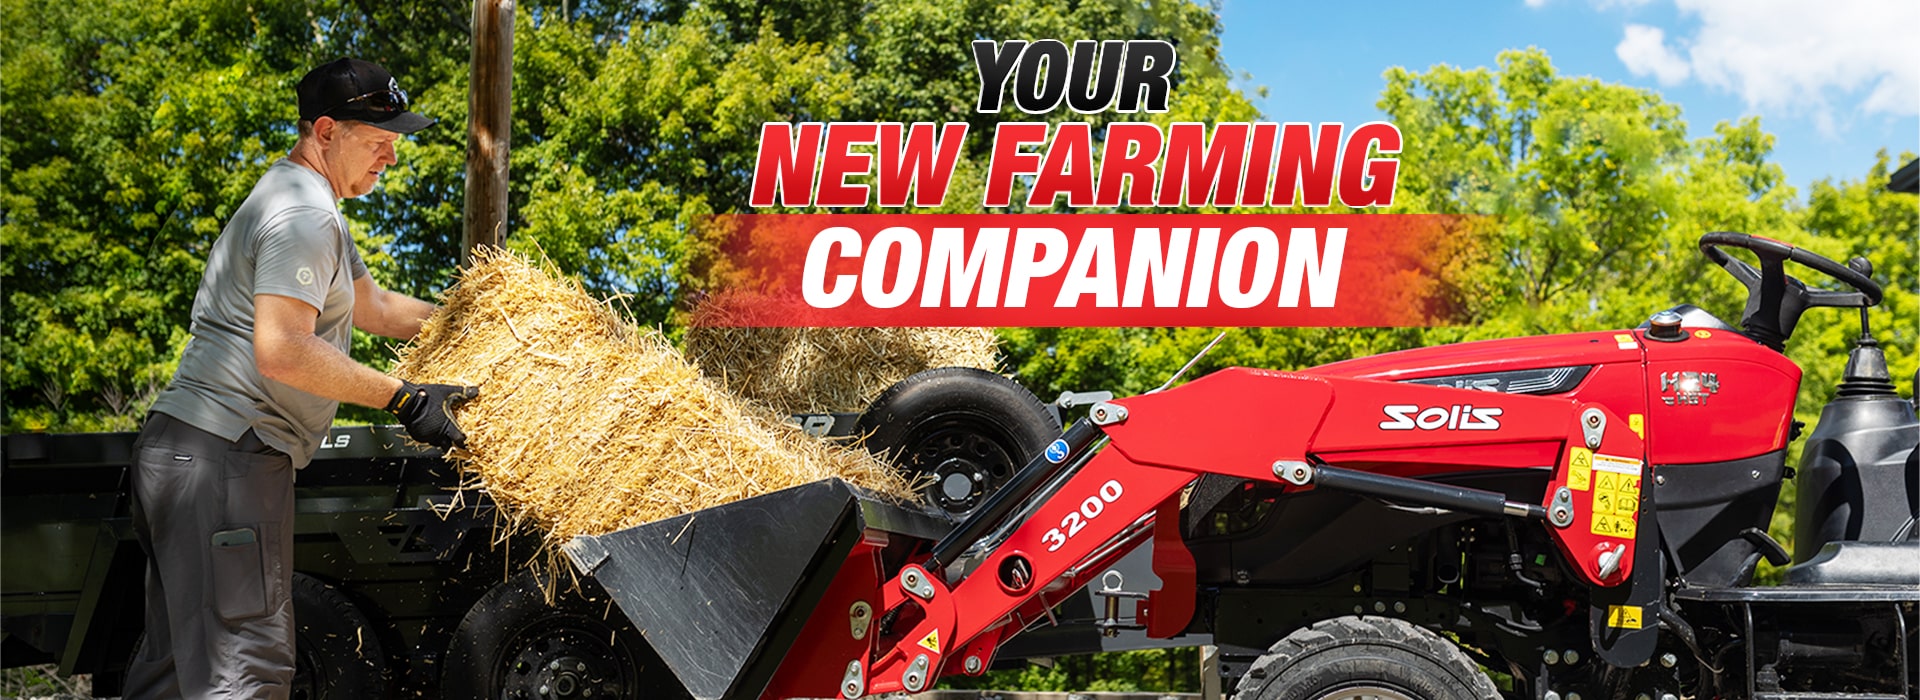 Get Ready to Meet Your New Farming Companion: ‘The Solis Tractor’